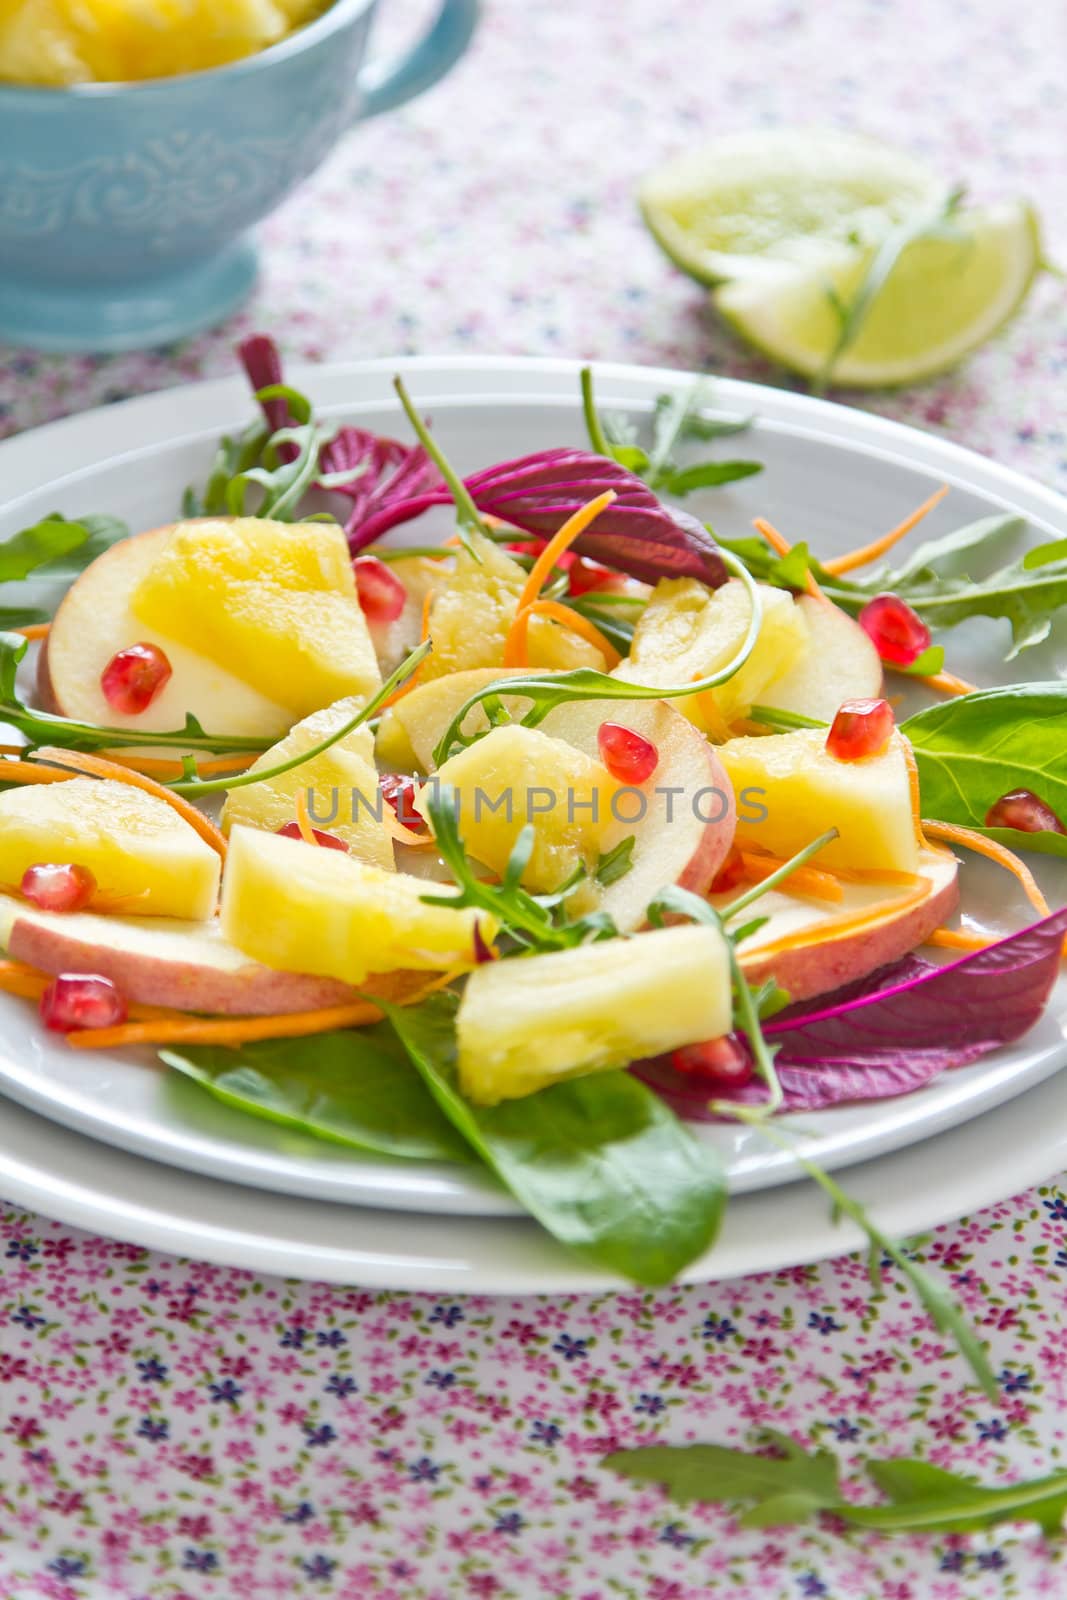 Pineapple with pomegranate and spinach salad